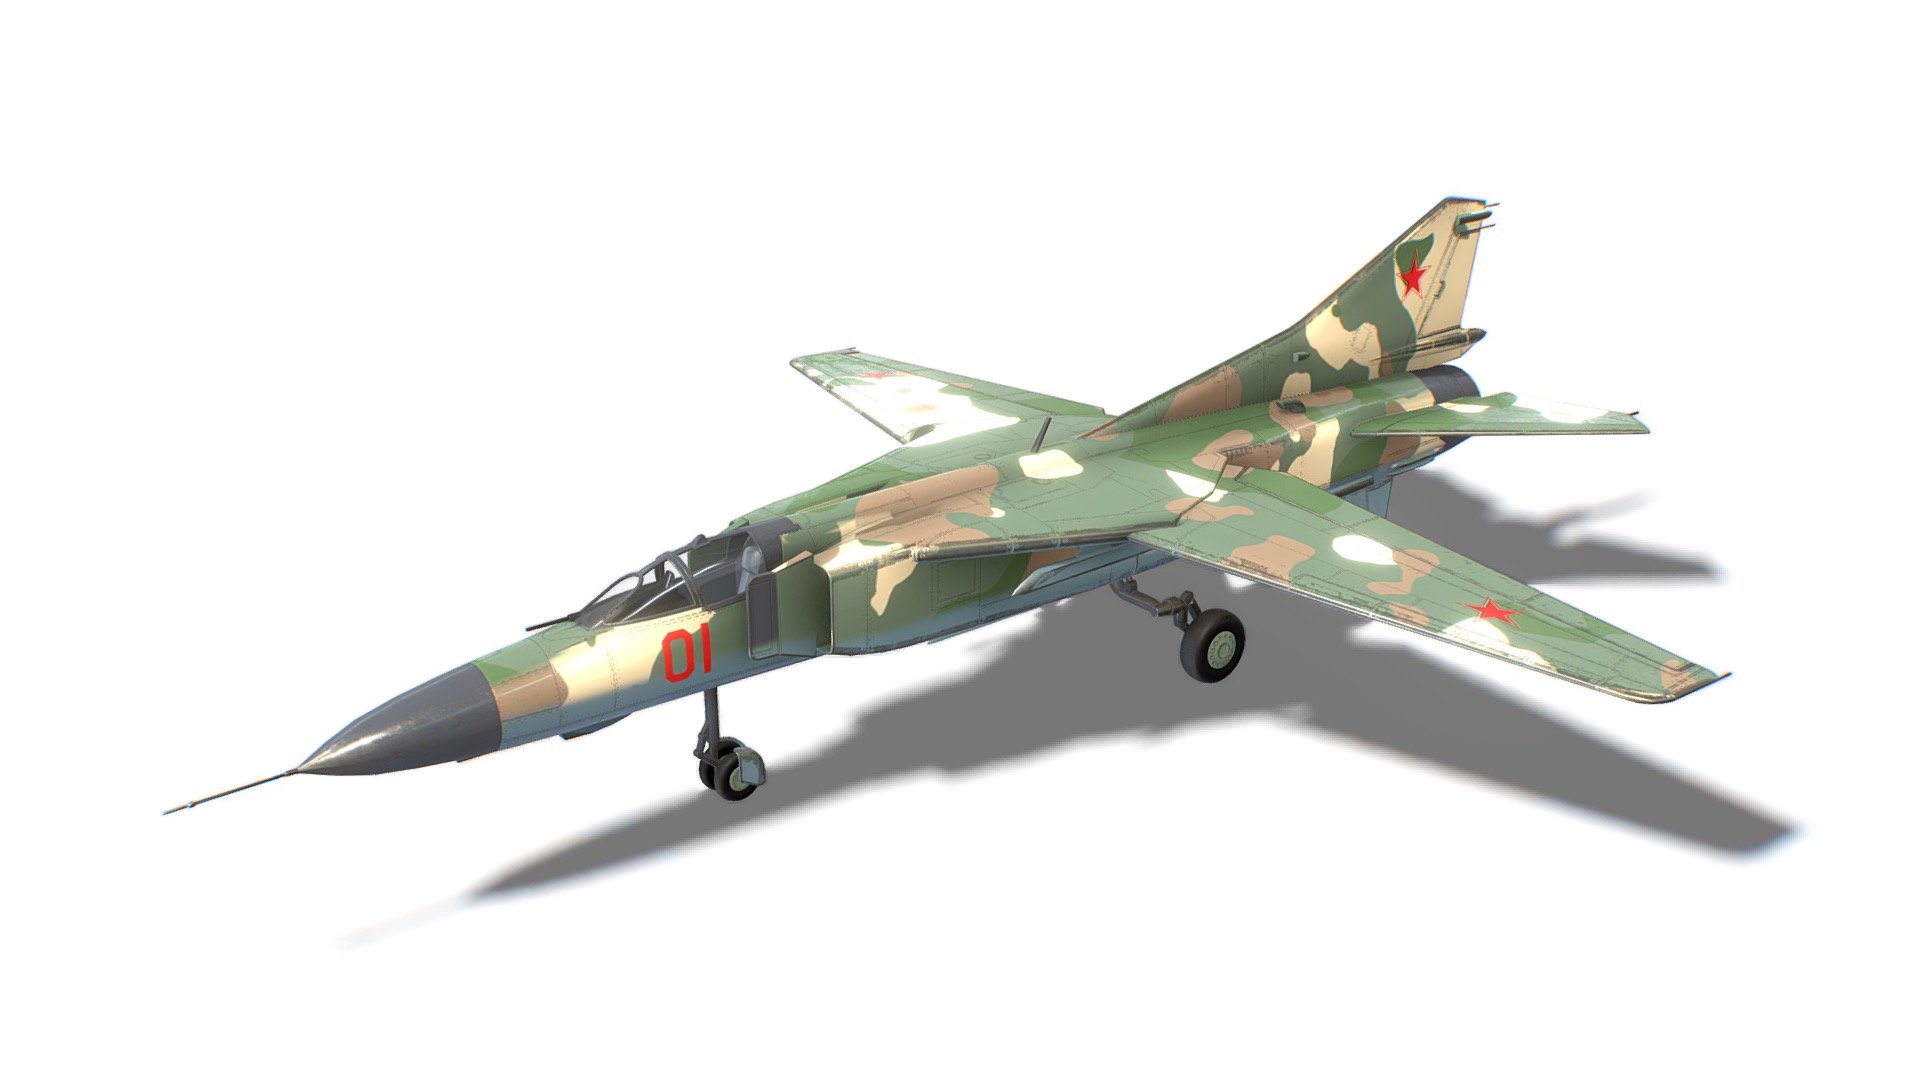 The model looks like a MIG-23 Flogger. All parts of the model were made in full accordance with the original. Each dynamical part is separated and has correct pivot points, that allow easy animation and use in games. 

Advanced information:
- single material for whole mesh;
- set of 4K PBR textures;
- set of 4K Unreal PBR textures;
- set of 4K Unity PBR textures;
- set of 4K CryEngine PBR textures;
- FBX, DAE, ABC, OBJ and X3D file formats;
- 4 level of details;

Mesh details:
LOD0 - 10294
LOD1 - 5146
LOD2 - 2573
LOD3 - 300 - MIG-23 Flogger Jet Fighter Aircraft - 3D model by FreakGames 3d model